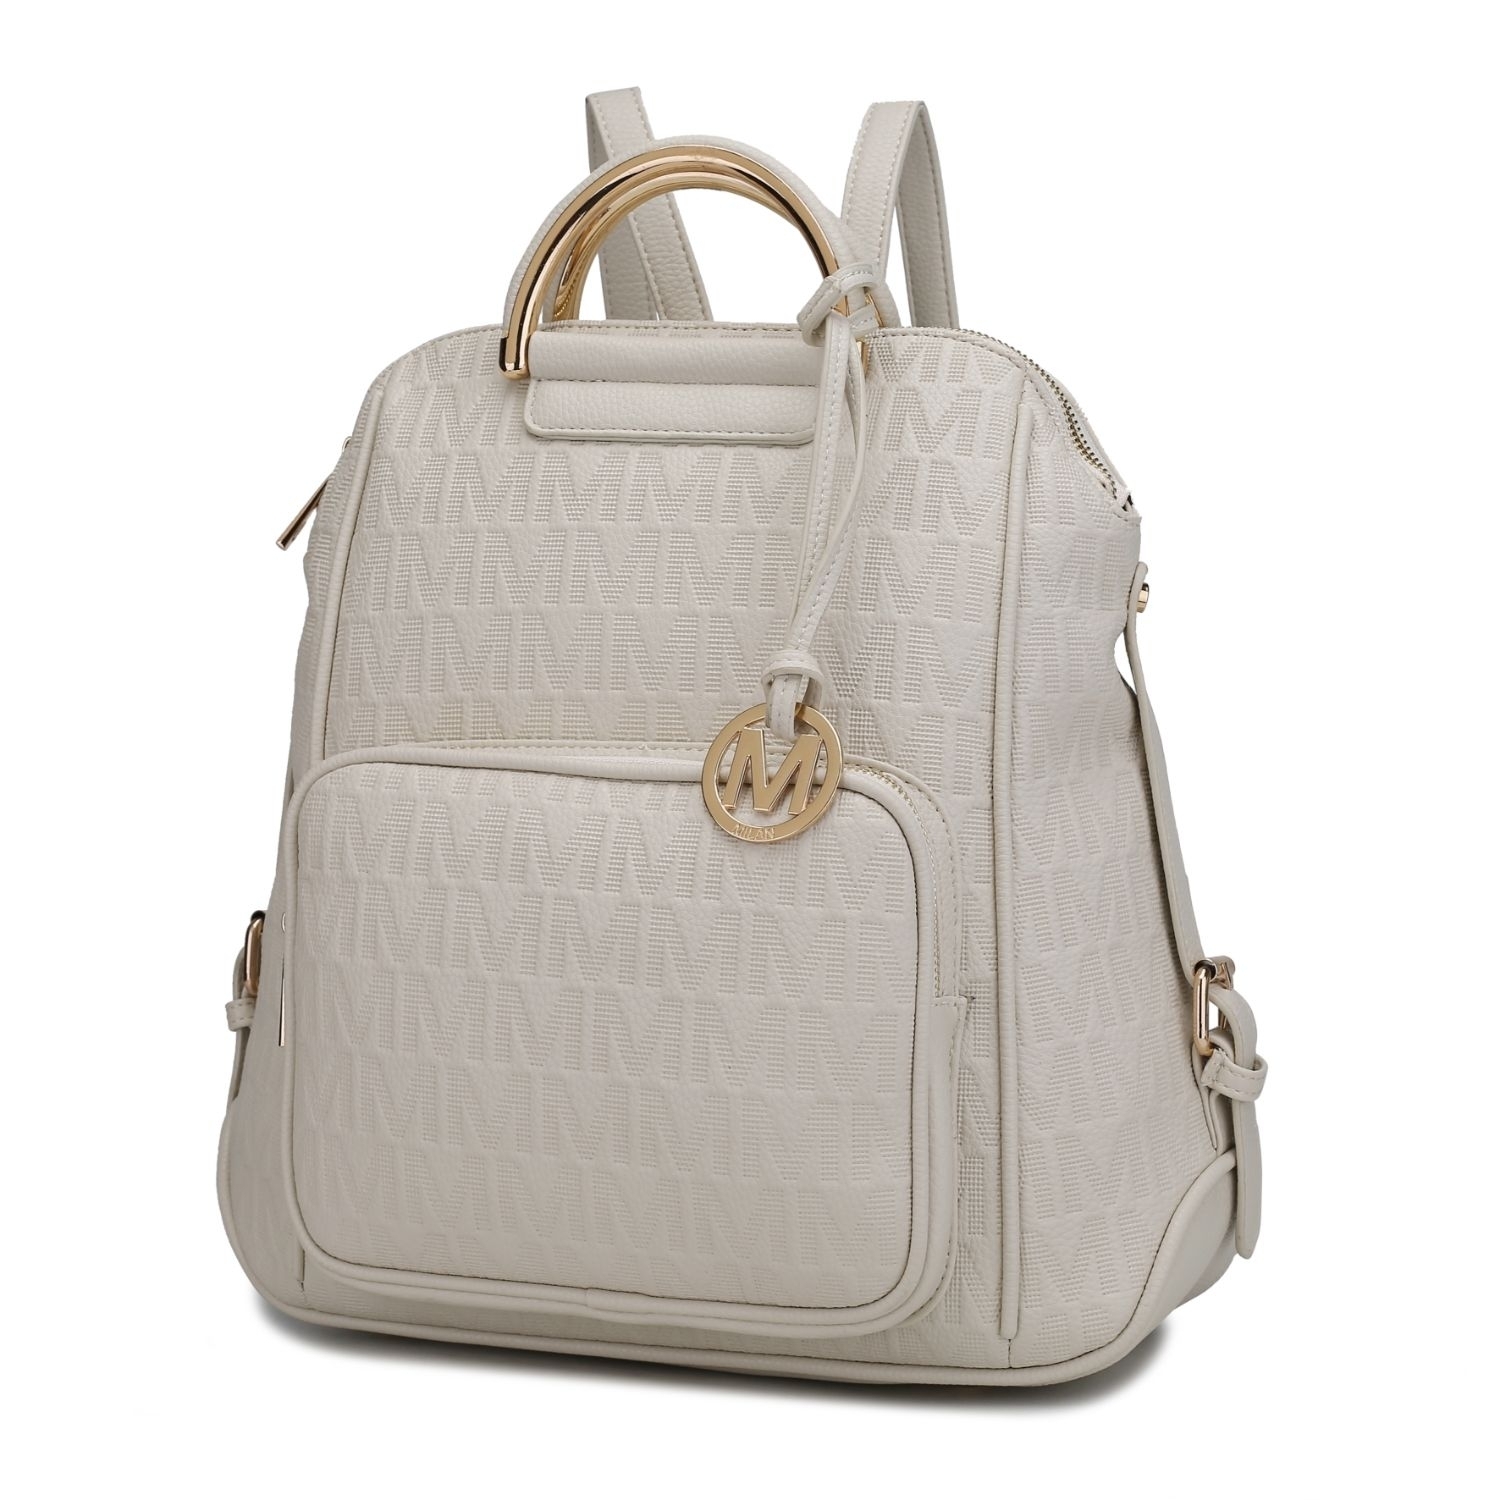 MKF Collection Torra Milan .M. Signature Trendy Backpack By Mia K. - Chocolate